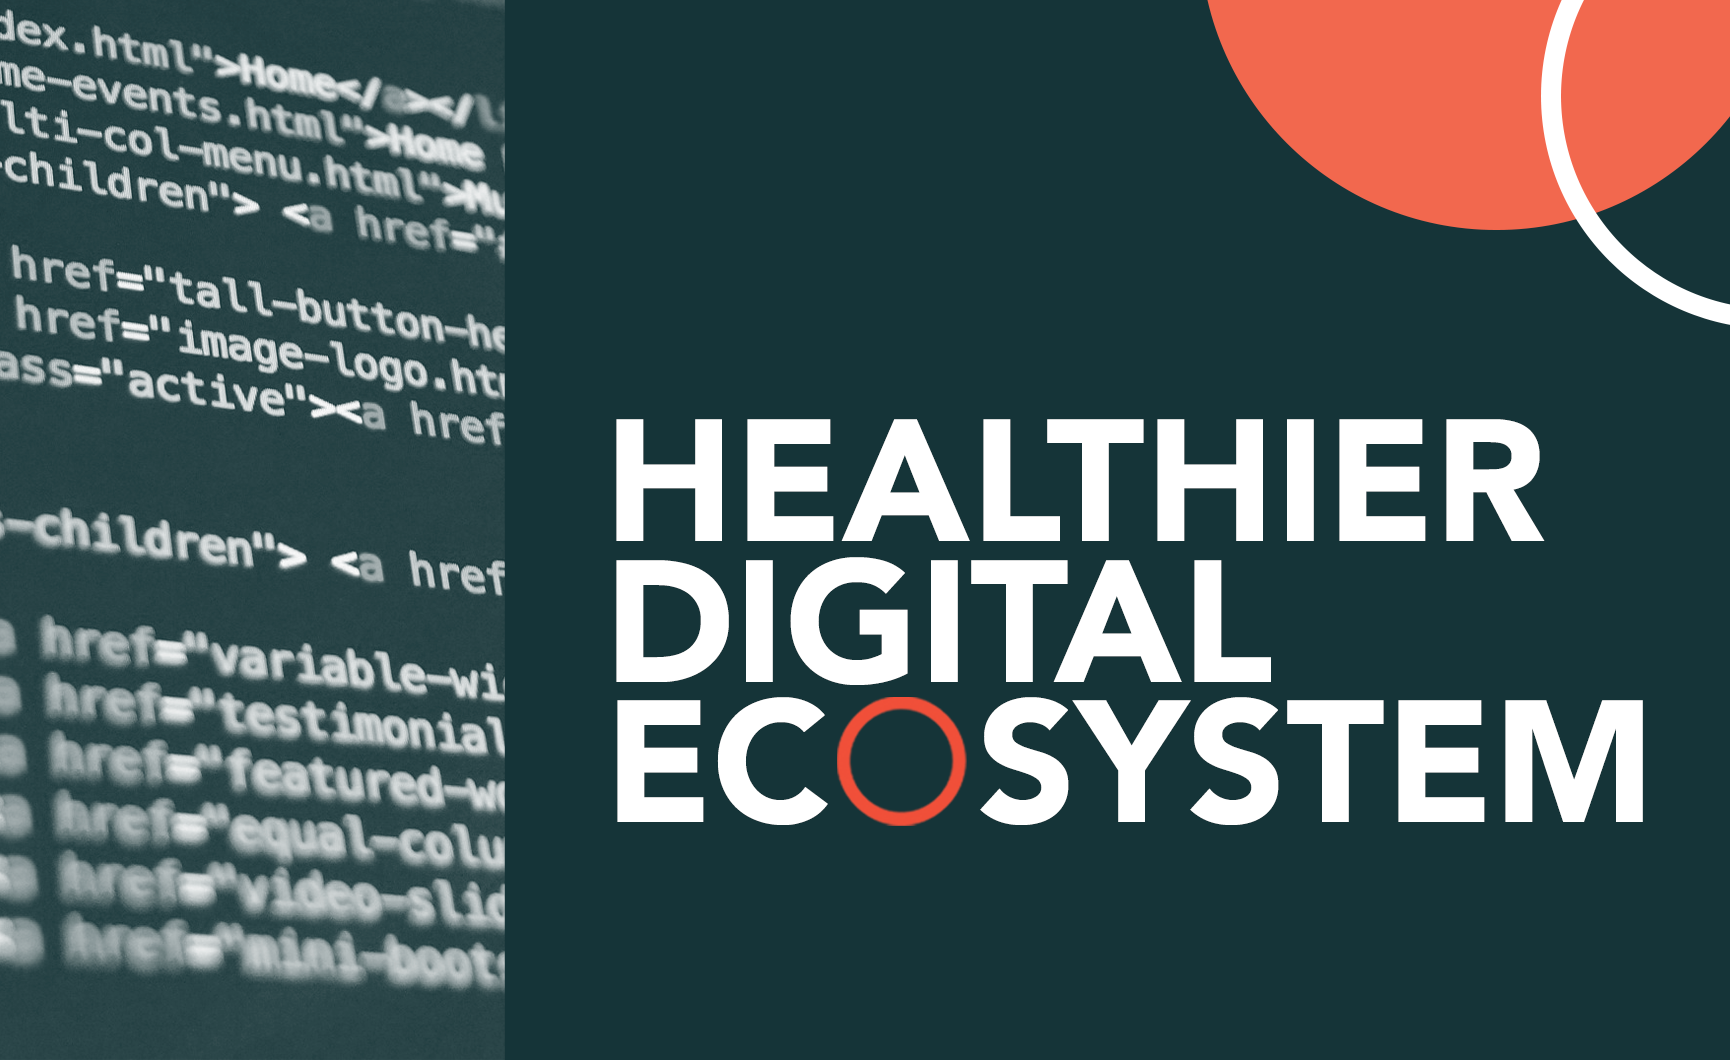 A healthier digital ecosystem, that protects and promotes digital rights